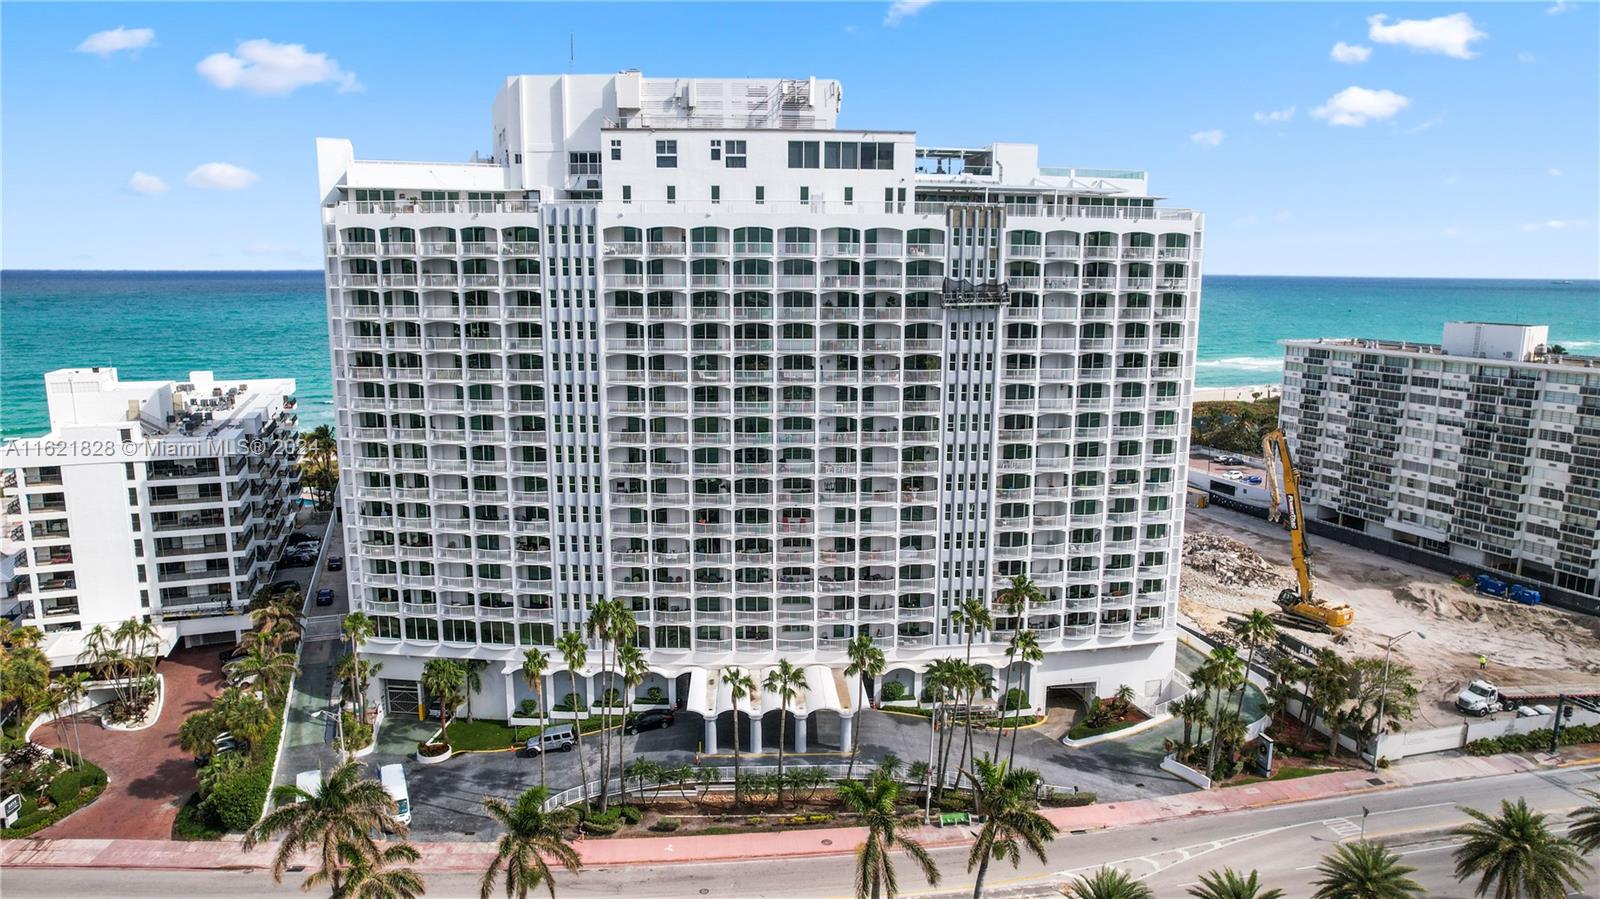 Rarely available fully furnished 3/2 corner condo in the prestigious Carriage House! Relish stunning direct ocean, city and bay views at this beautiful residence in the heart of Miami Beach. The condo is tastefully furnished and features one of a kind enormous wrap around balcony, views from every room, split floor plan, fully equipped open concept kitchen with high end appliances, separate laundry room, floor to ceiling windows, custom closets, 2 assigned parking spots and high speed internet/cable included. This exclusive oceanfront completely renovated property offers Olympic size pools, hot tub, ocean front gym, tennis court, 24/7 front desk and valet, beach access, convenience store and highly rated Hoshi restaurant. Will not last!!